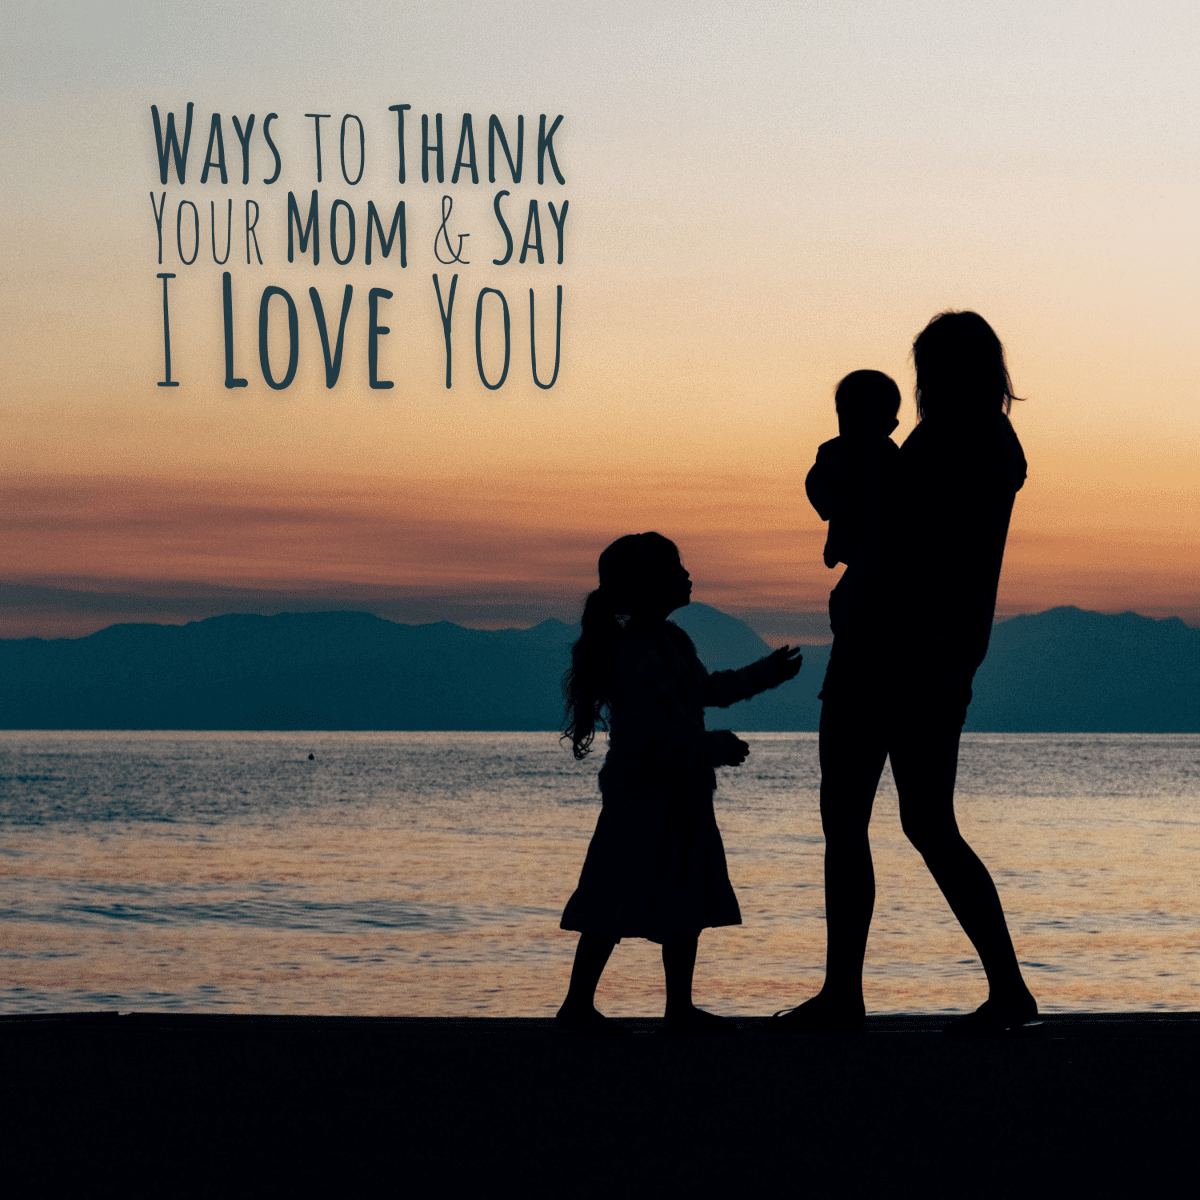 Ways to Thank Your Mom and Say 